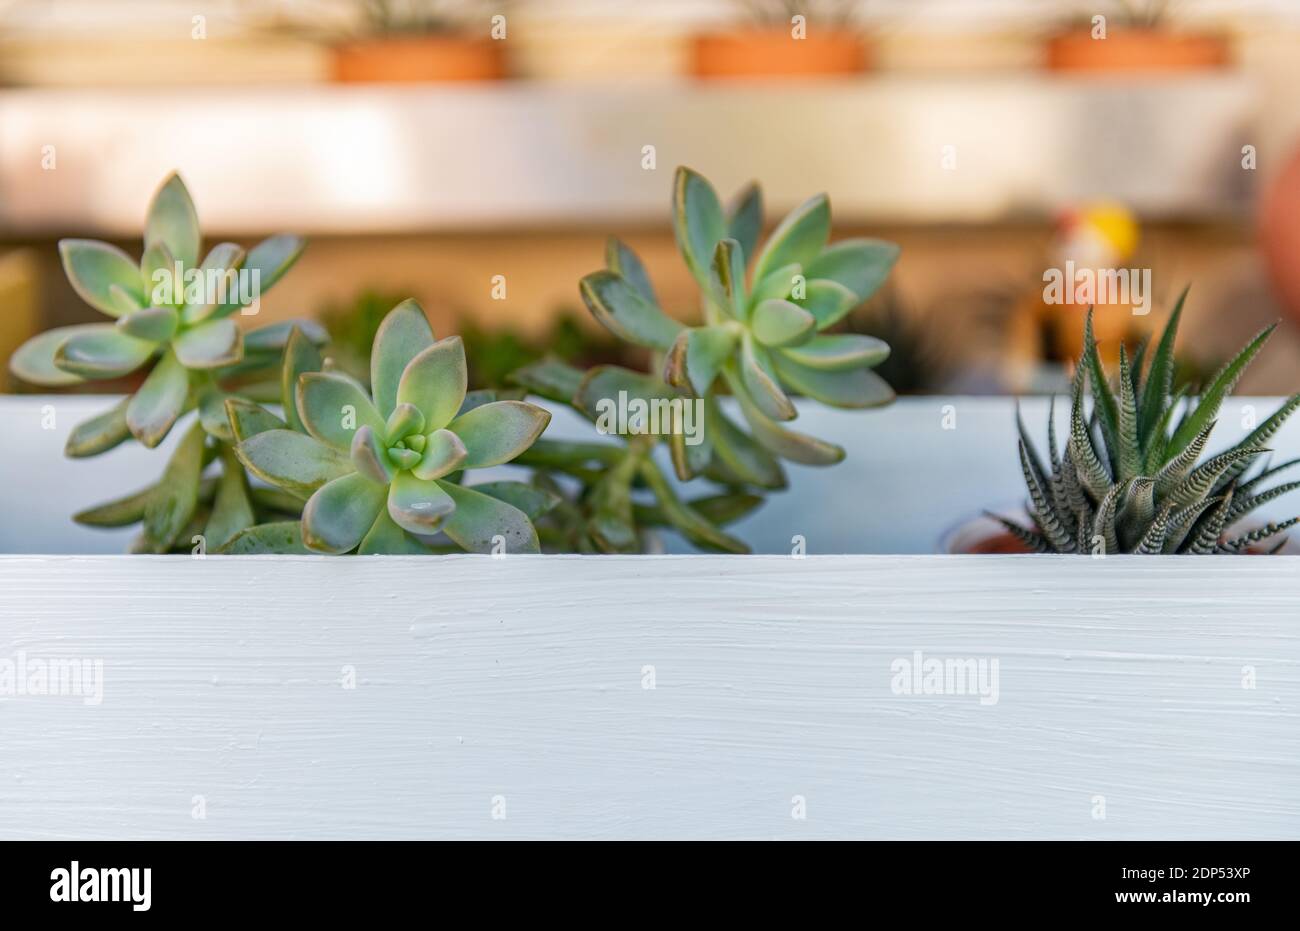 Succulent Plants in garden container near a window. The plants are Crassula 'Spring Time' Succulents. Stock Photo